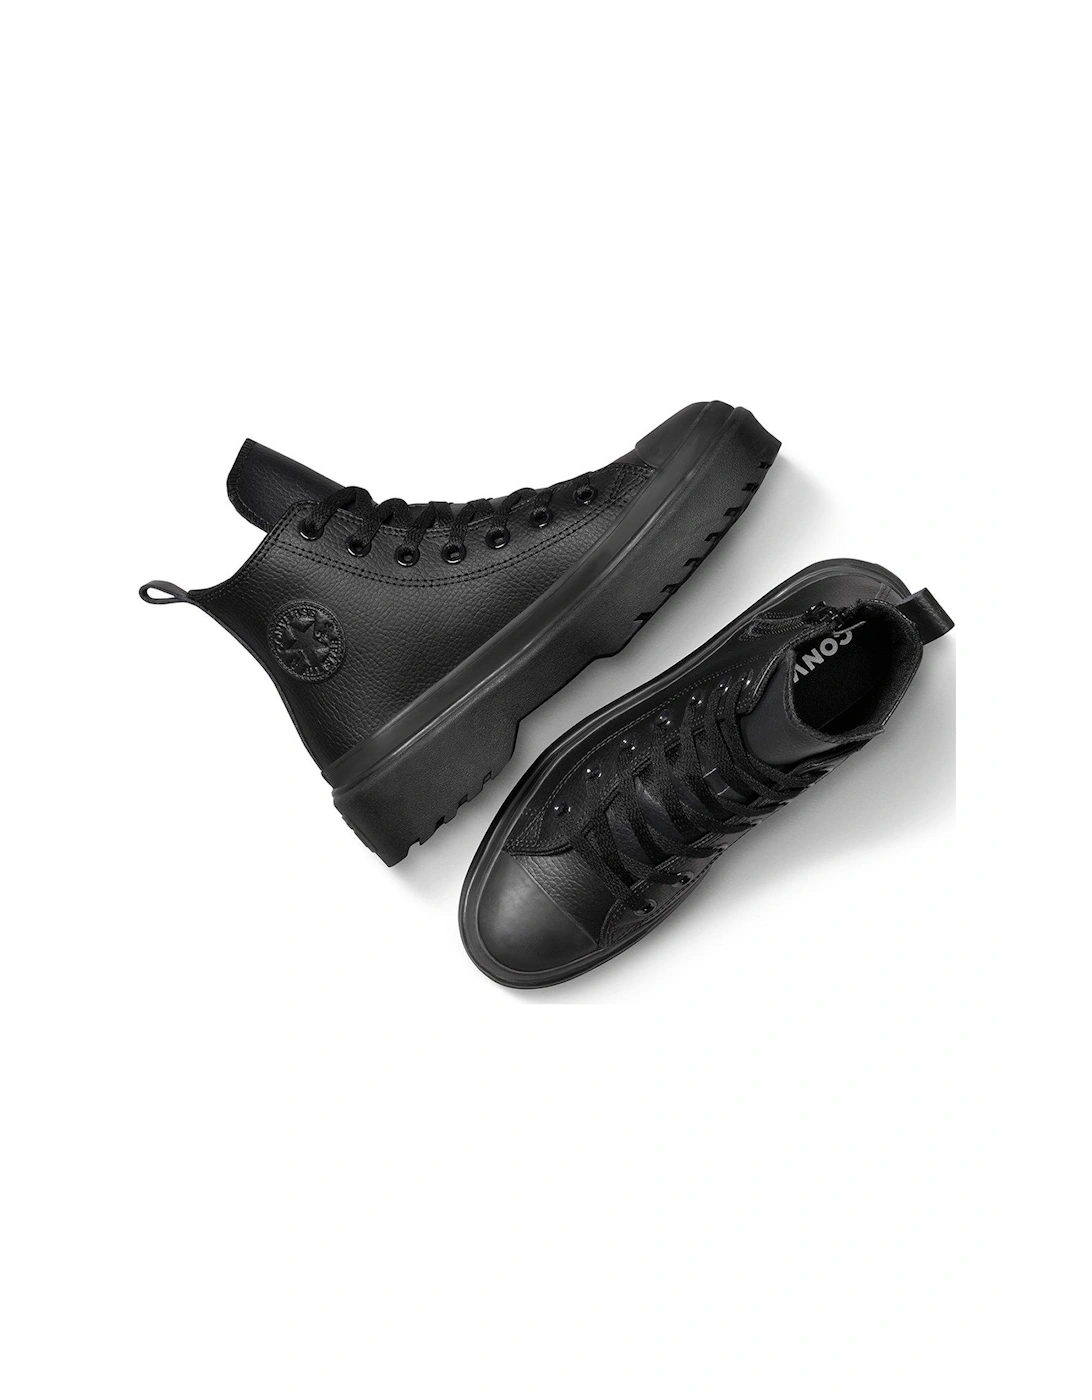 Chuck Taylor All Star Lugged Lift Leather Hi Top Trainers - Black